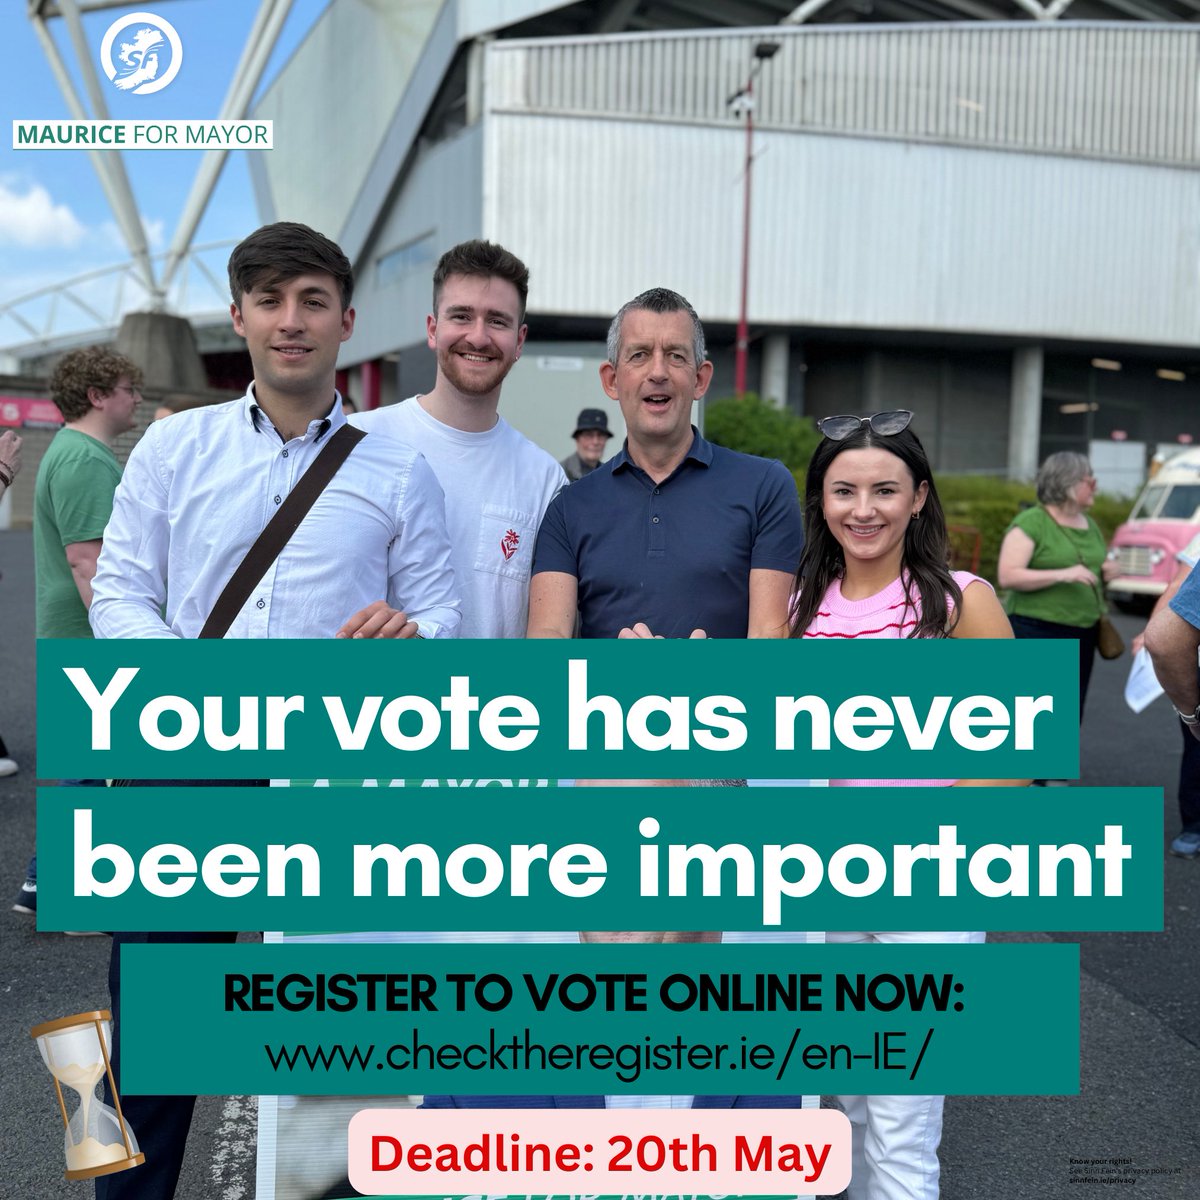 🚨DEADLINE APPROACHING🚨 Make sure you’re registered to vote before the 20th of May. Together on Friday the 7th of June let’s elect a Mayor for all! Vote for change! Vote Sinn Féin #Maurice4Mayor #SinnFein #Limerickmayor #limerick